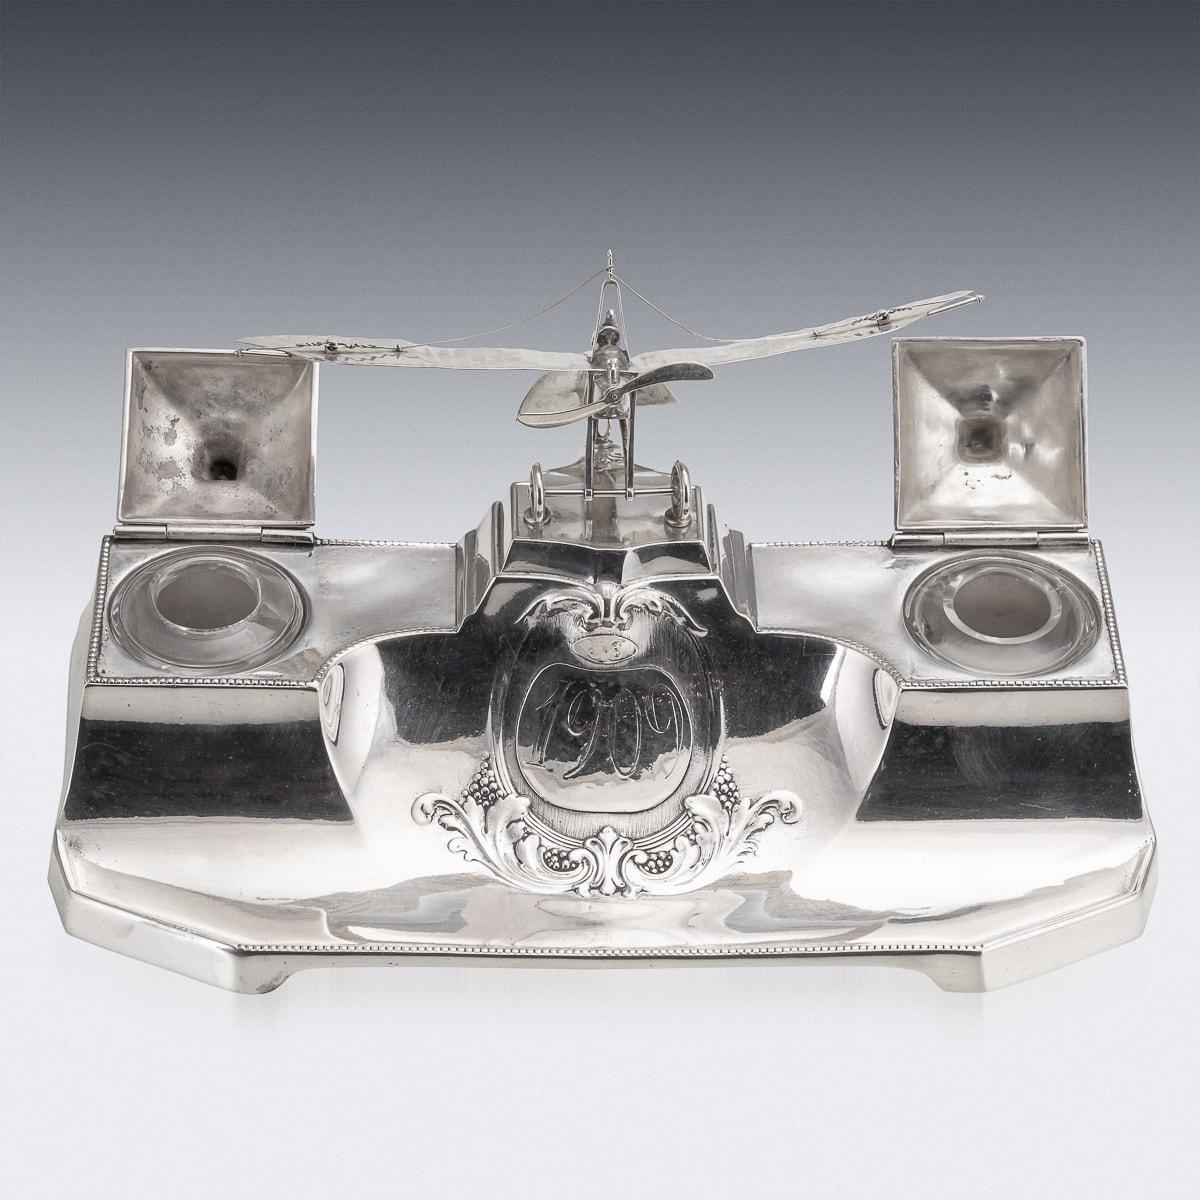 20th Century German Wmf Silver Double Inkwell With Aeroplane Theme, c.1920 2